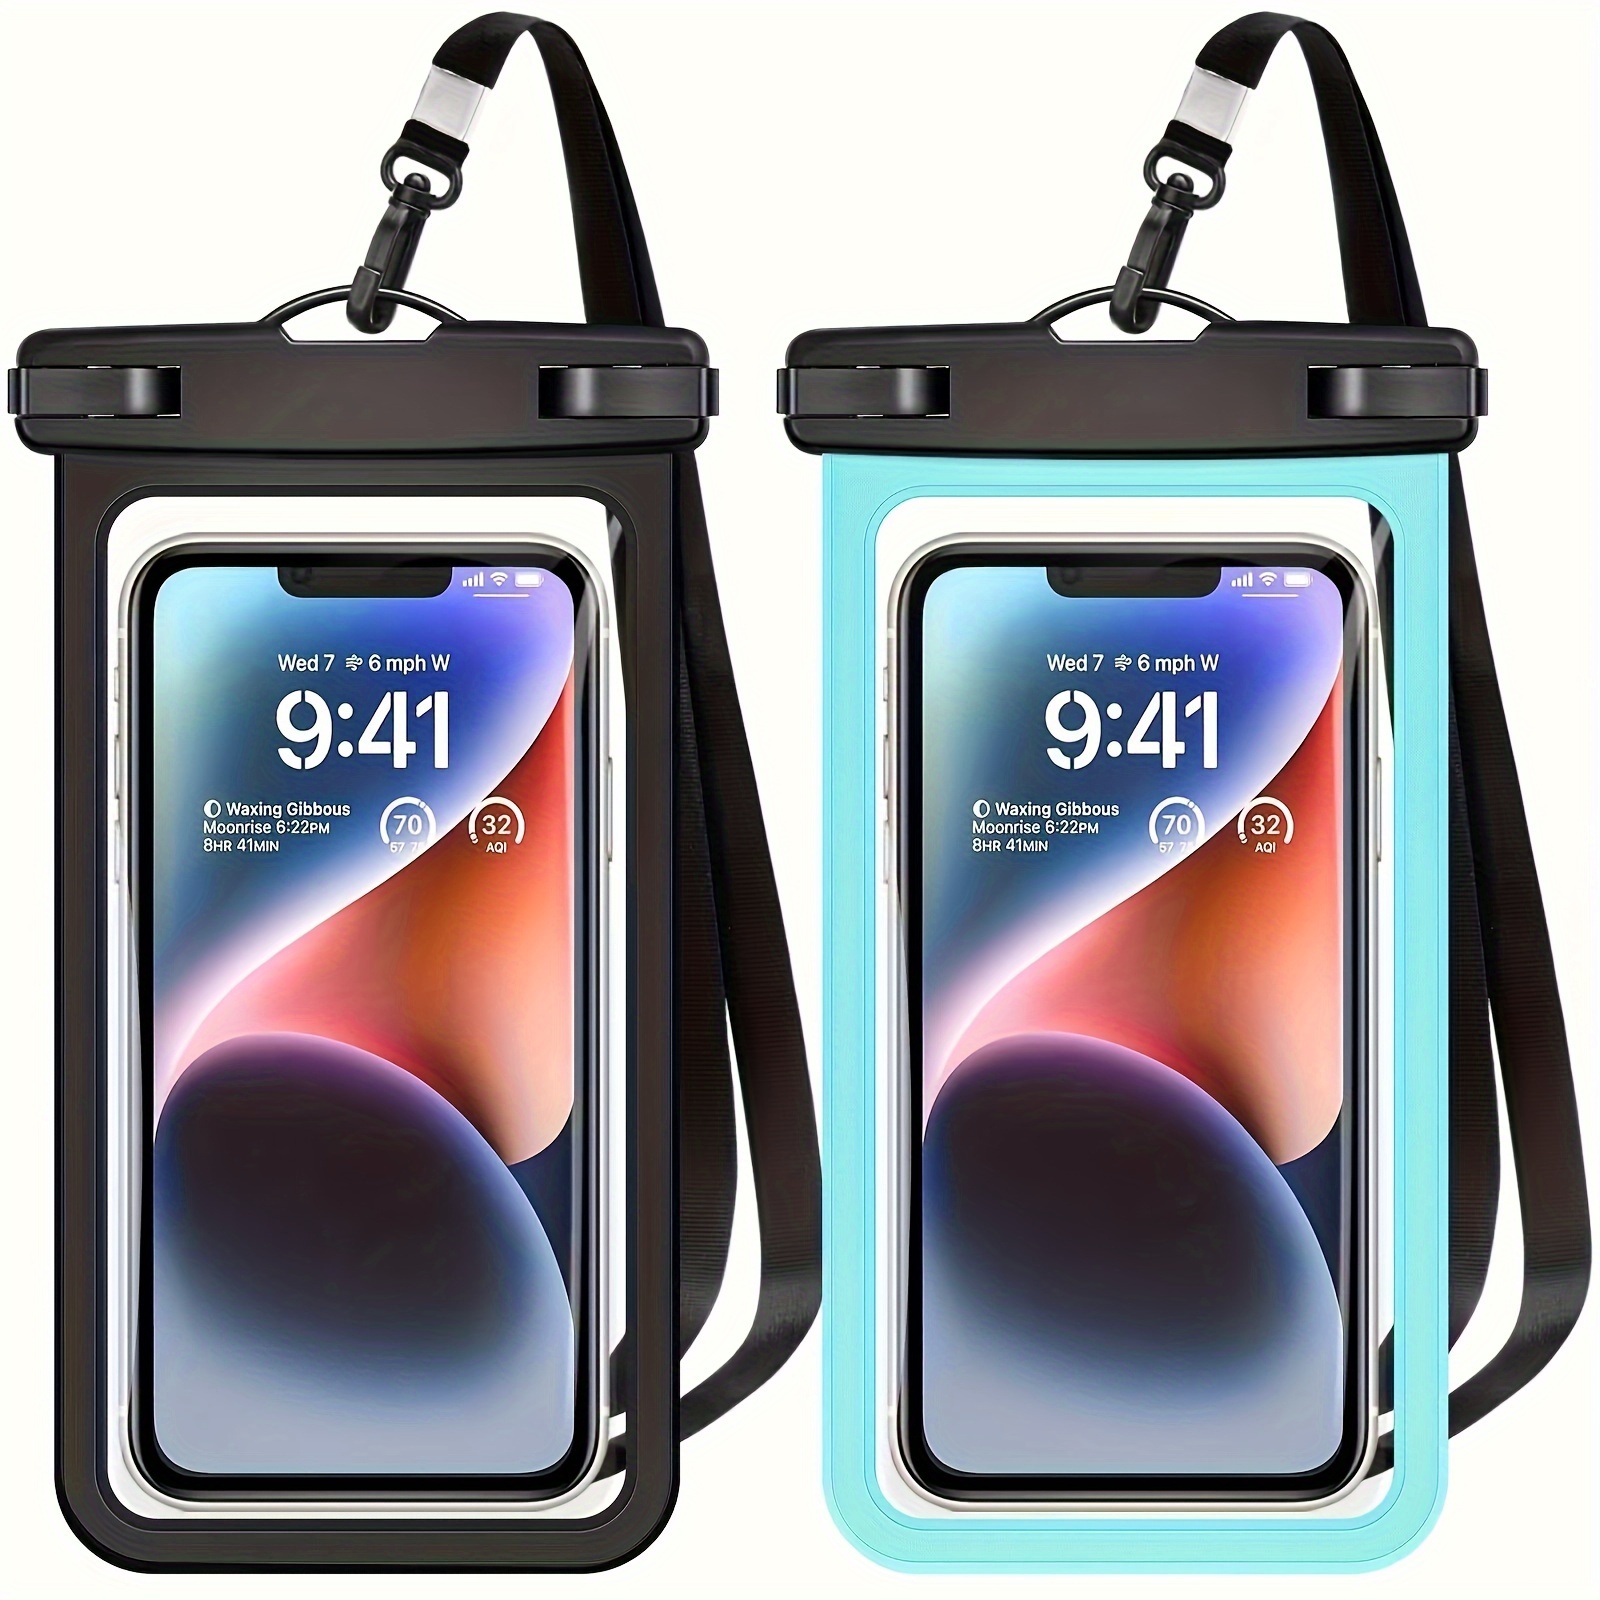 

2 Pieces Universal Waterproof Phone Pouch - Waterproof Case For 14 13 12 11 Pro Max Xs Plus Galaxy Cellphone Up To 7.0" Waterproof Cellphone Dry Bag Beach Vacation Essentials